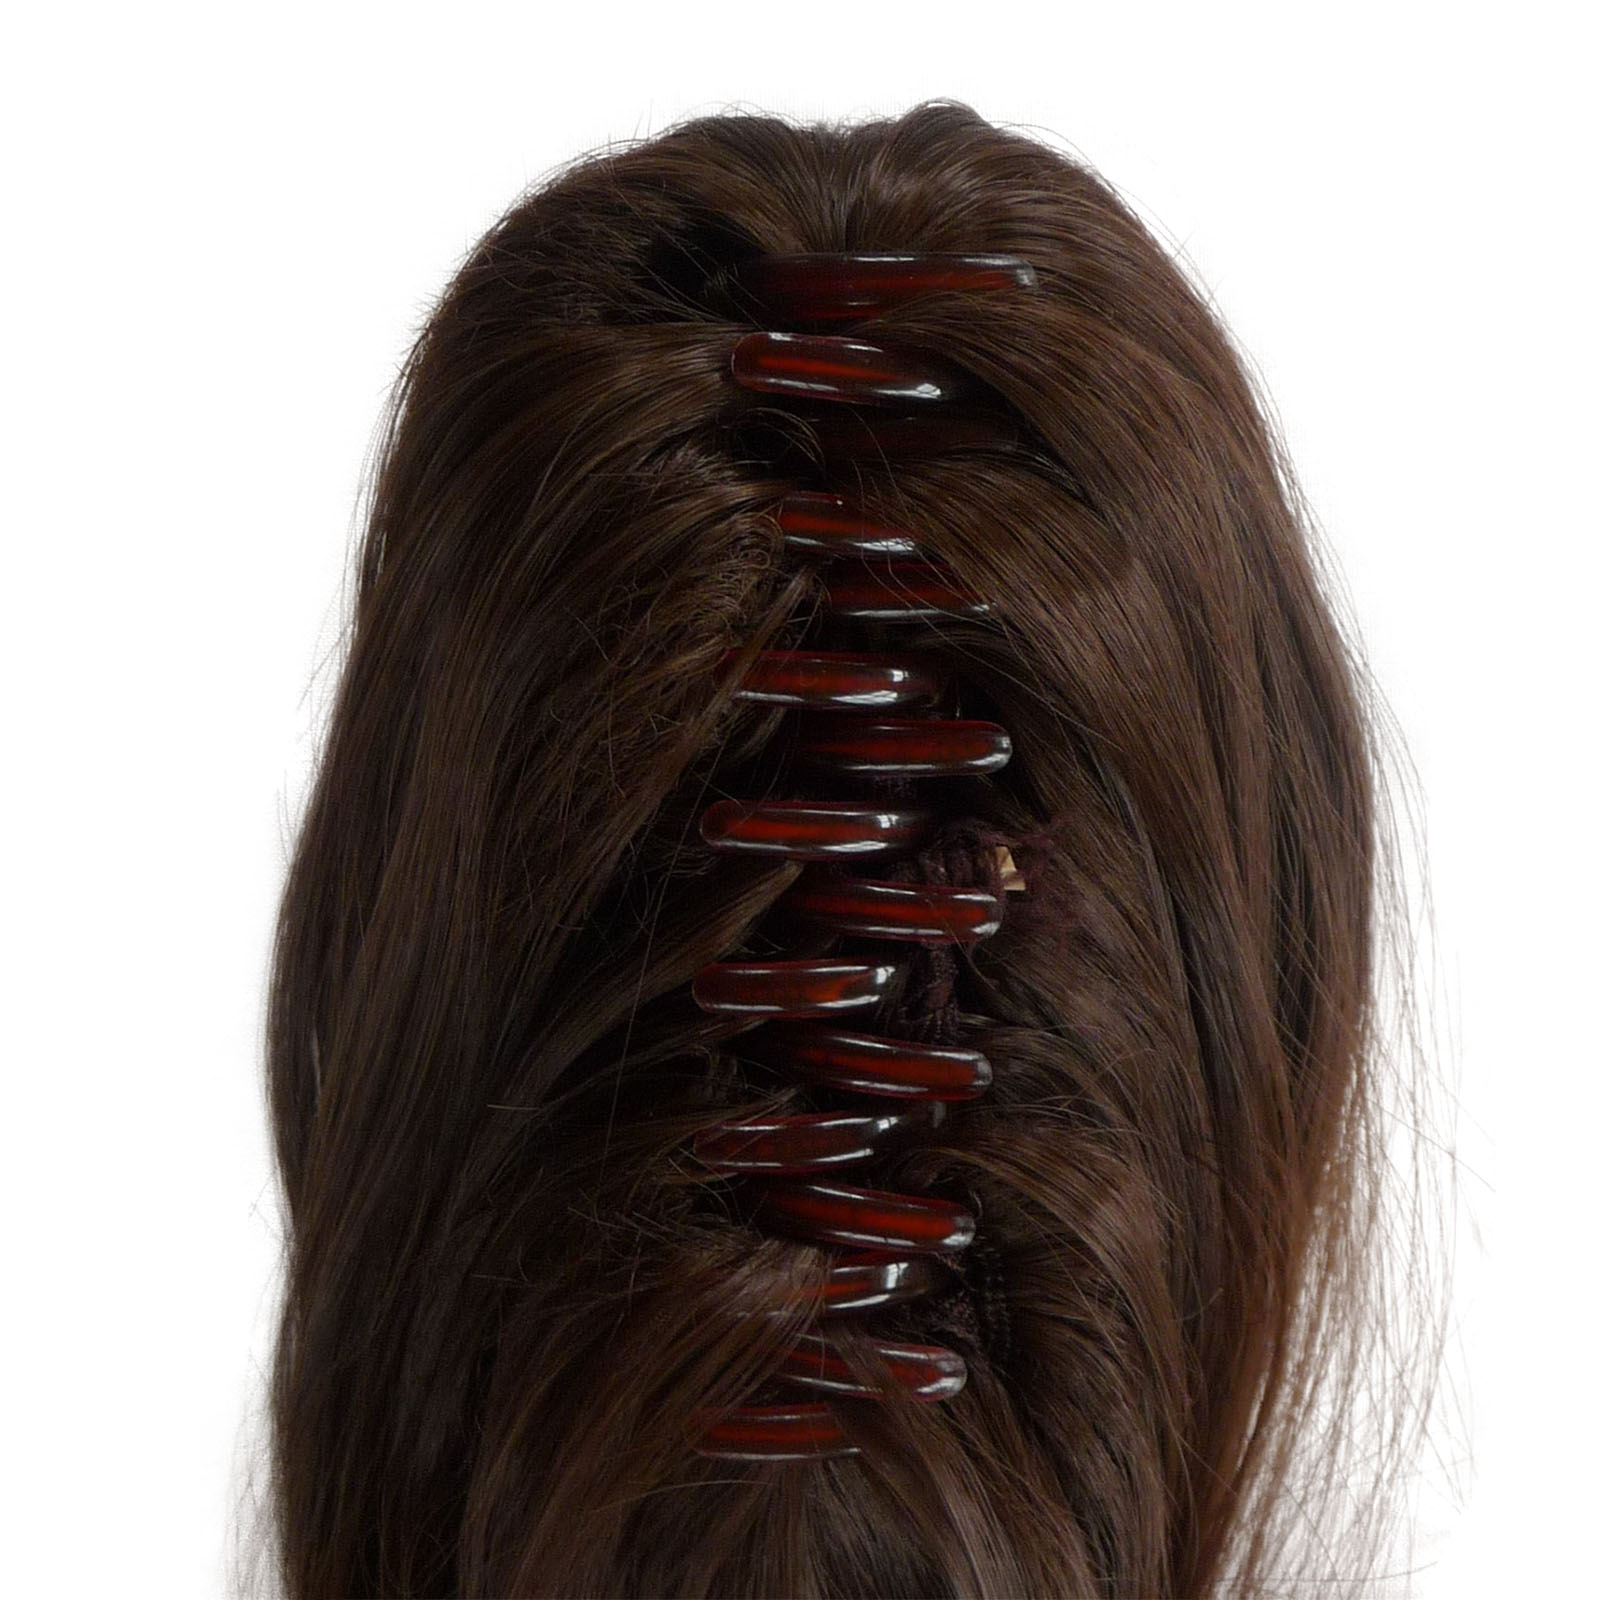 PONYTAIL Clip In Hair Extensions Chocolate Brown 8 REVERSIBLE